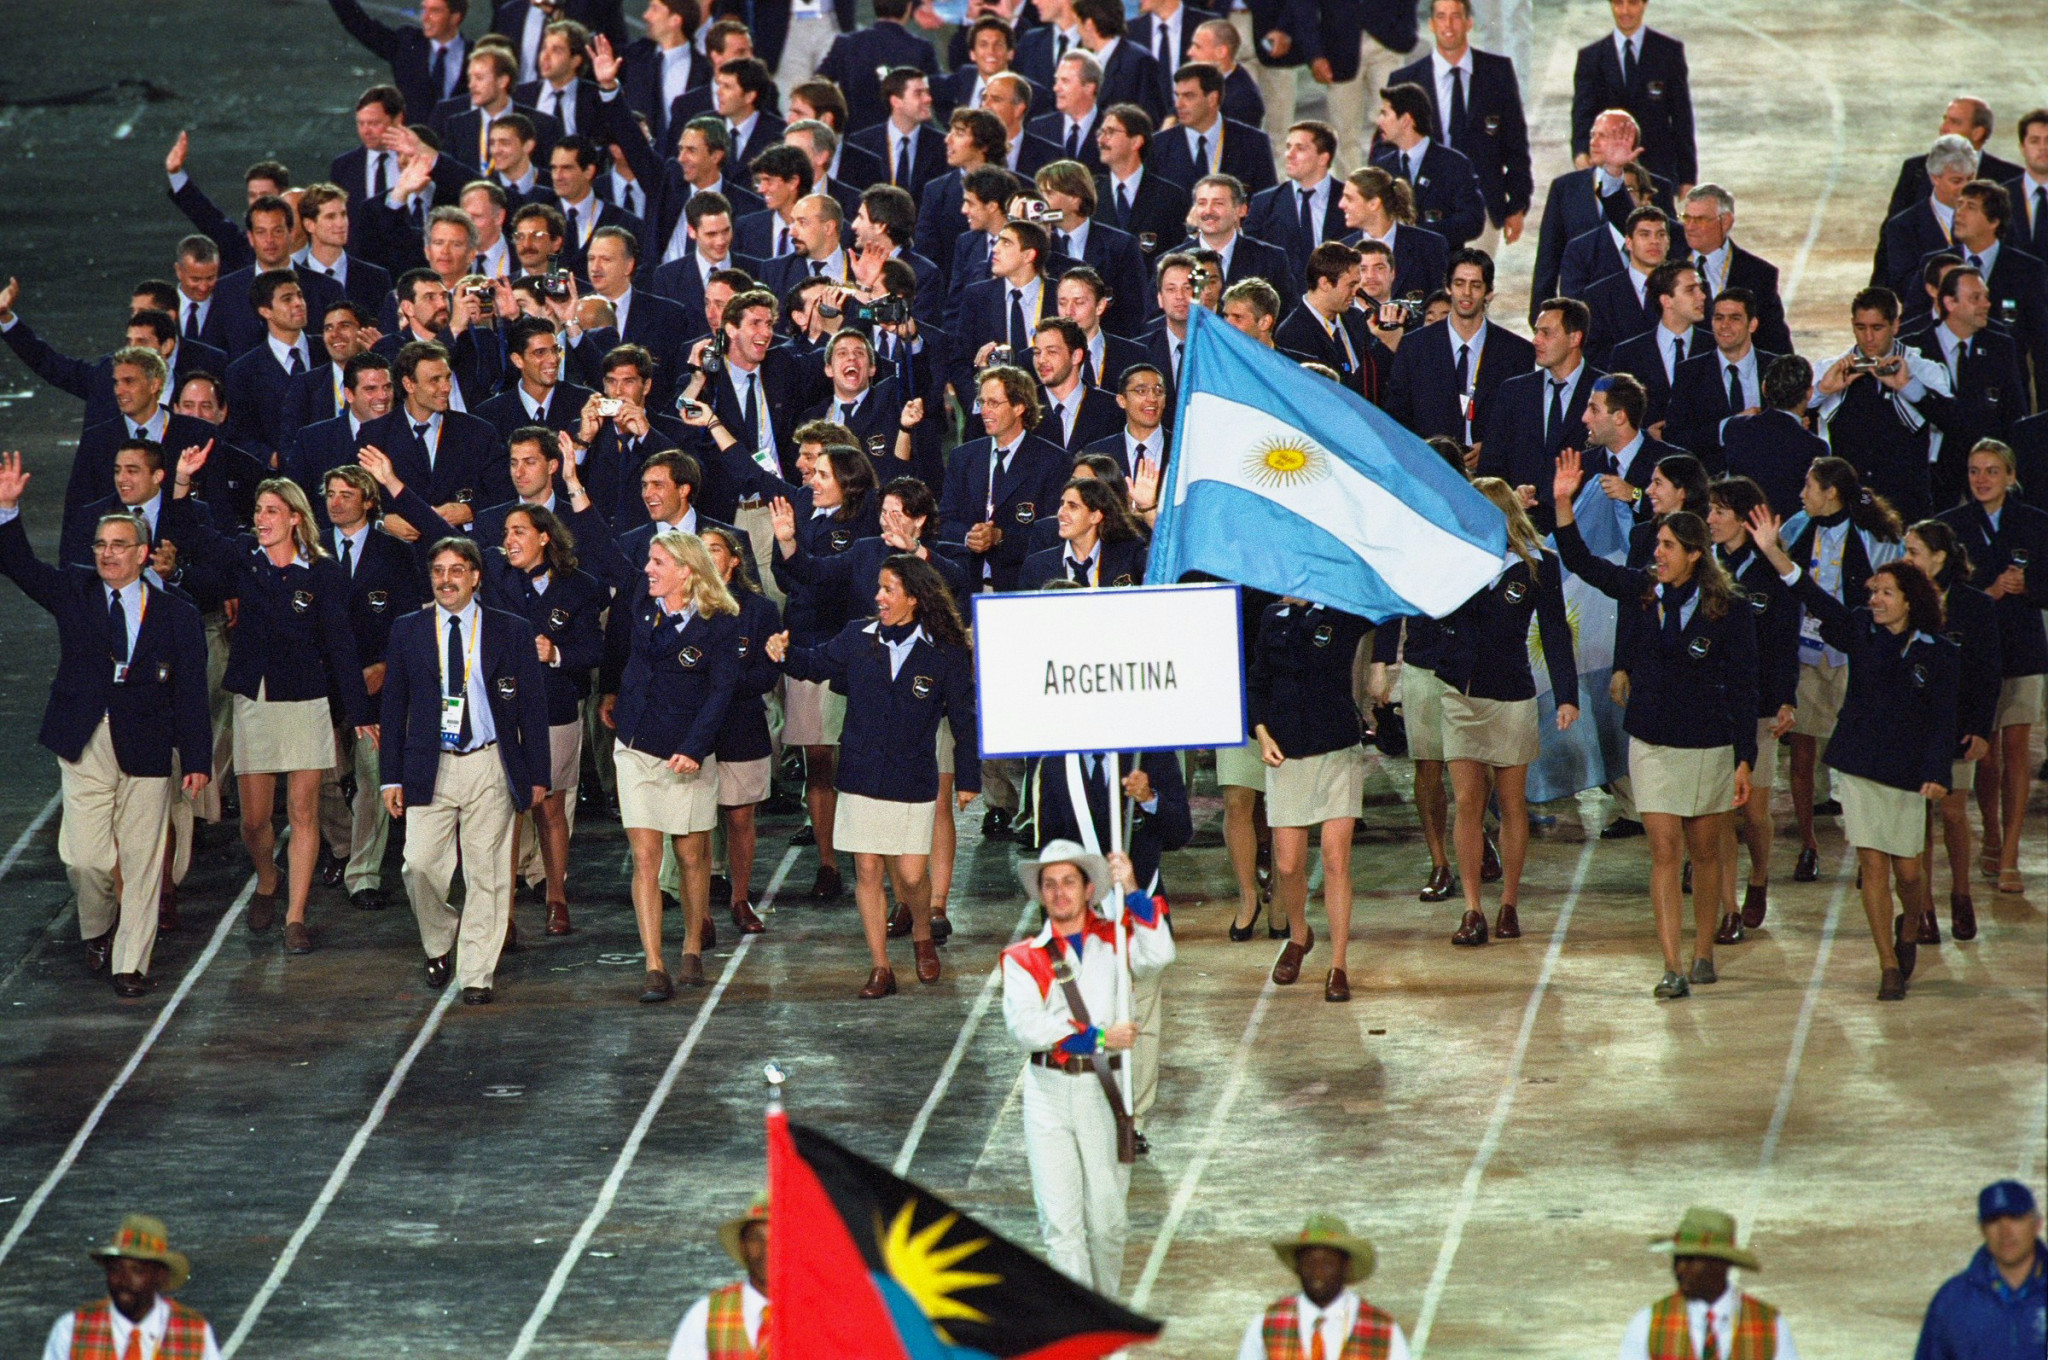 Aida Elena Giménez de Lario was part of Argentina's delegation that travelled to Sydney for the 2000 Olympic Games ©Getty Images